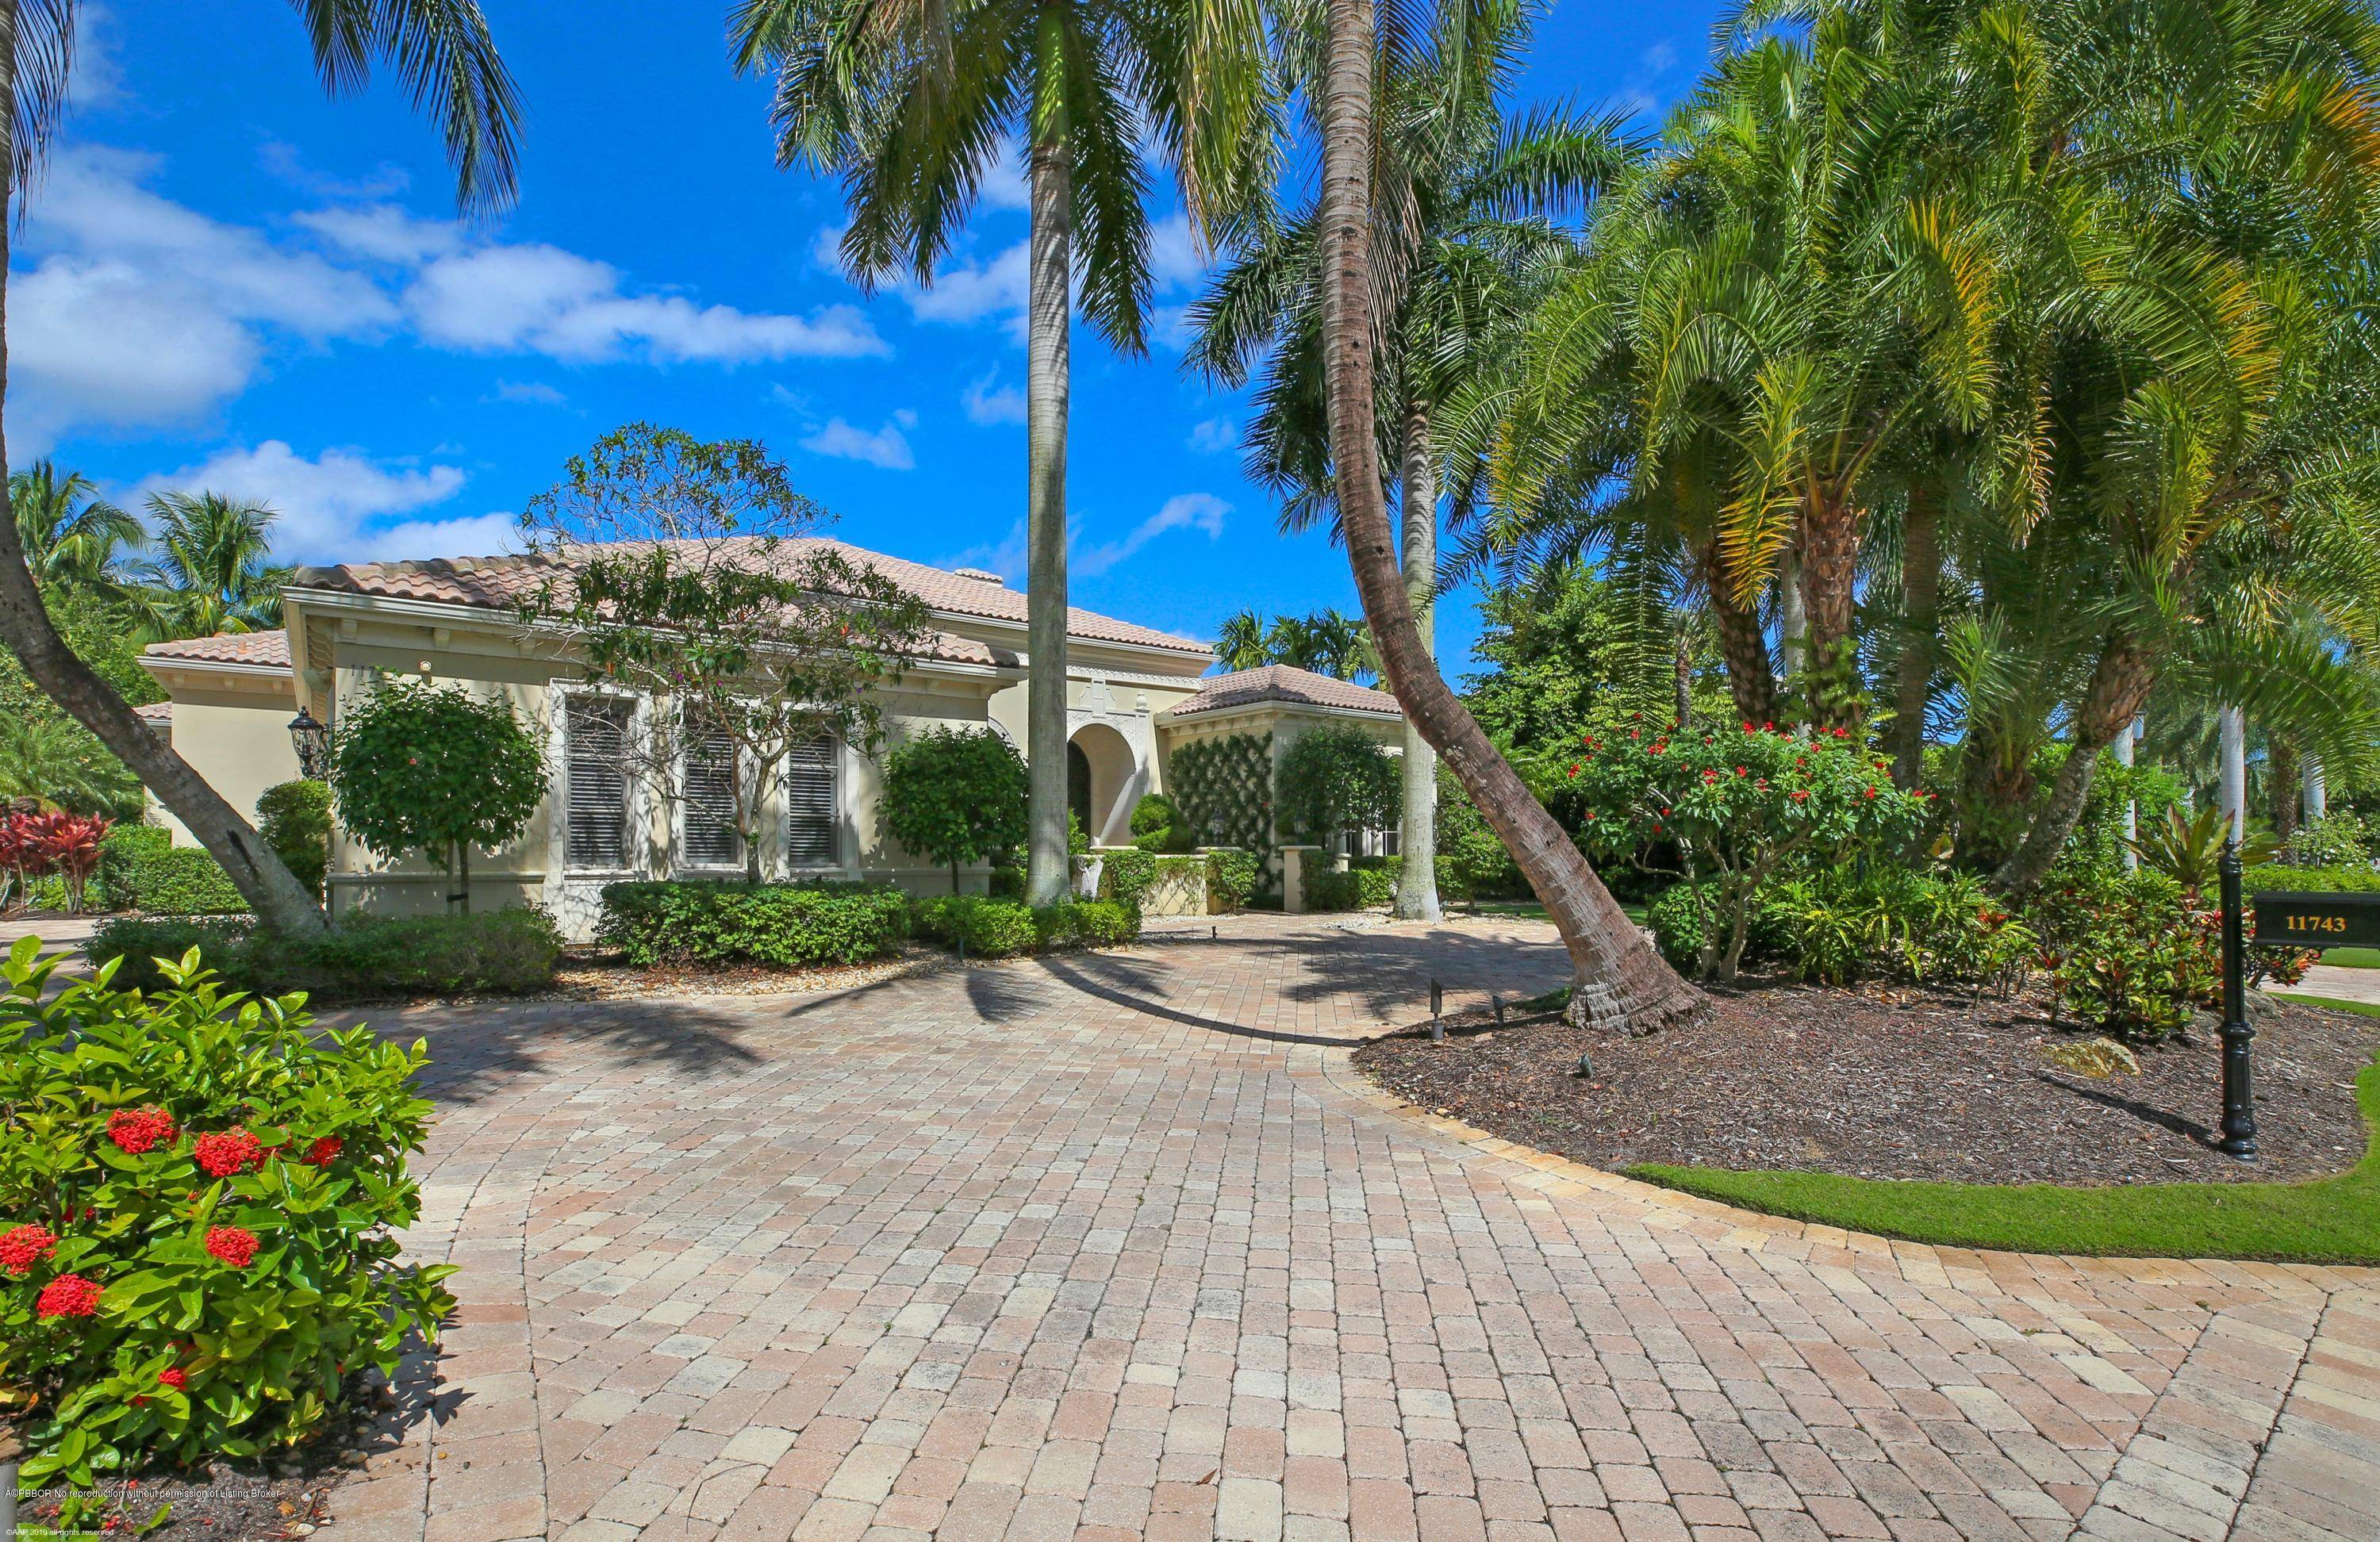 Take advantage of an opportunity to own this stunning home located in the Grand Estates of Old Palm Golf Club.